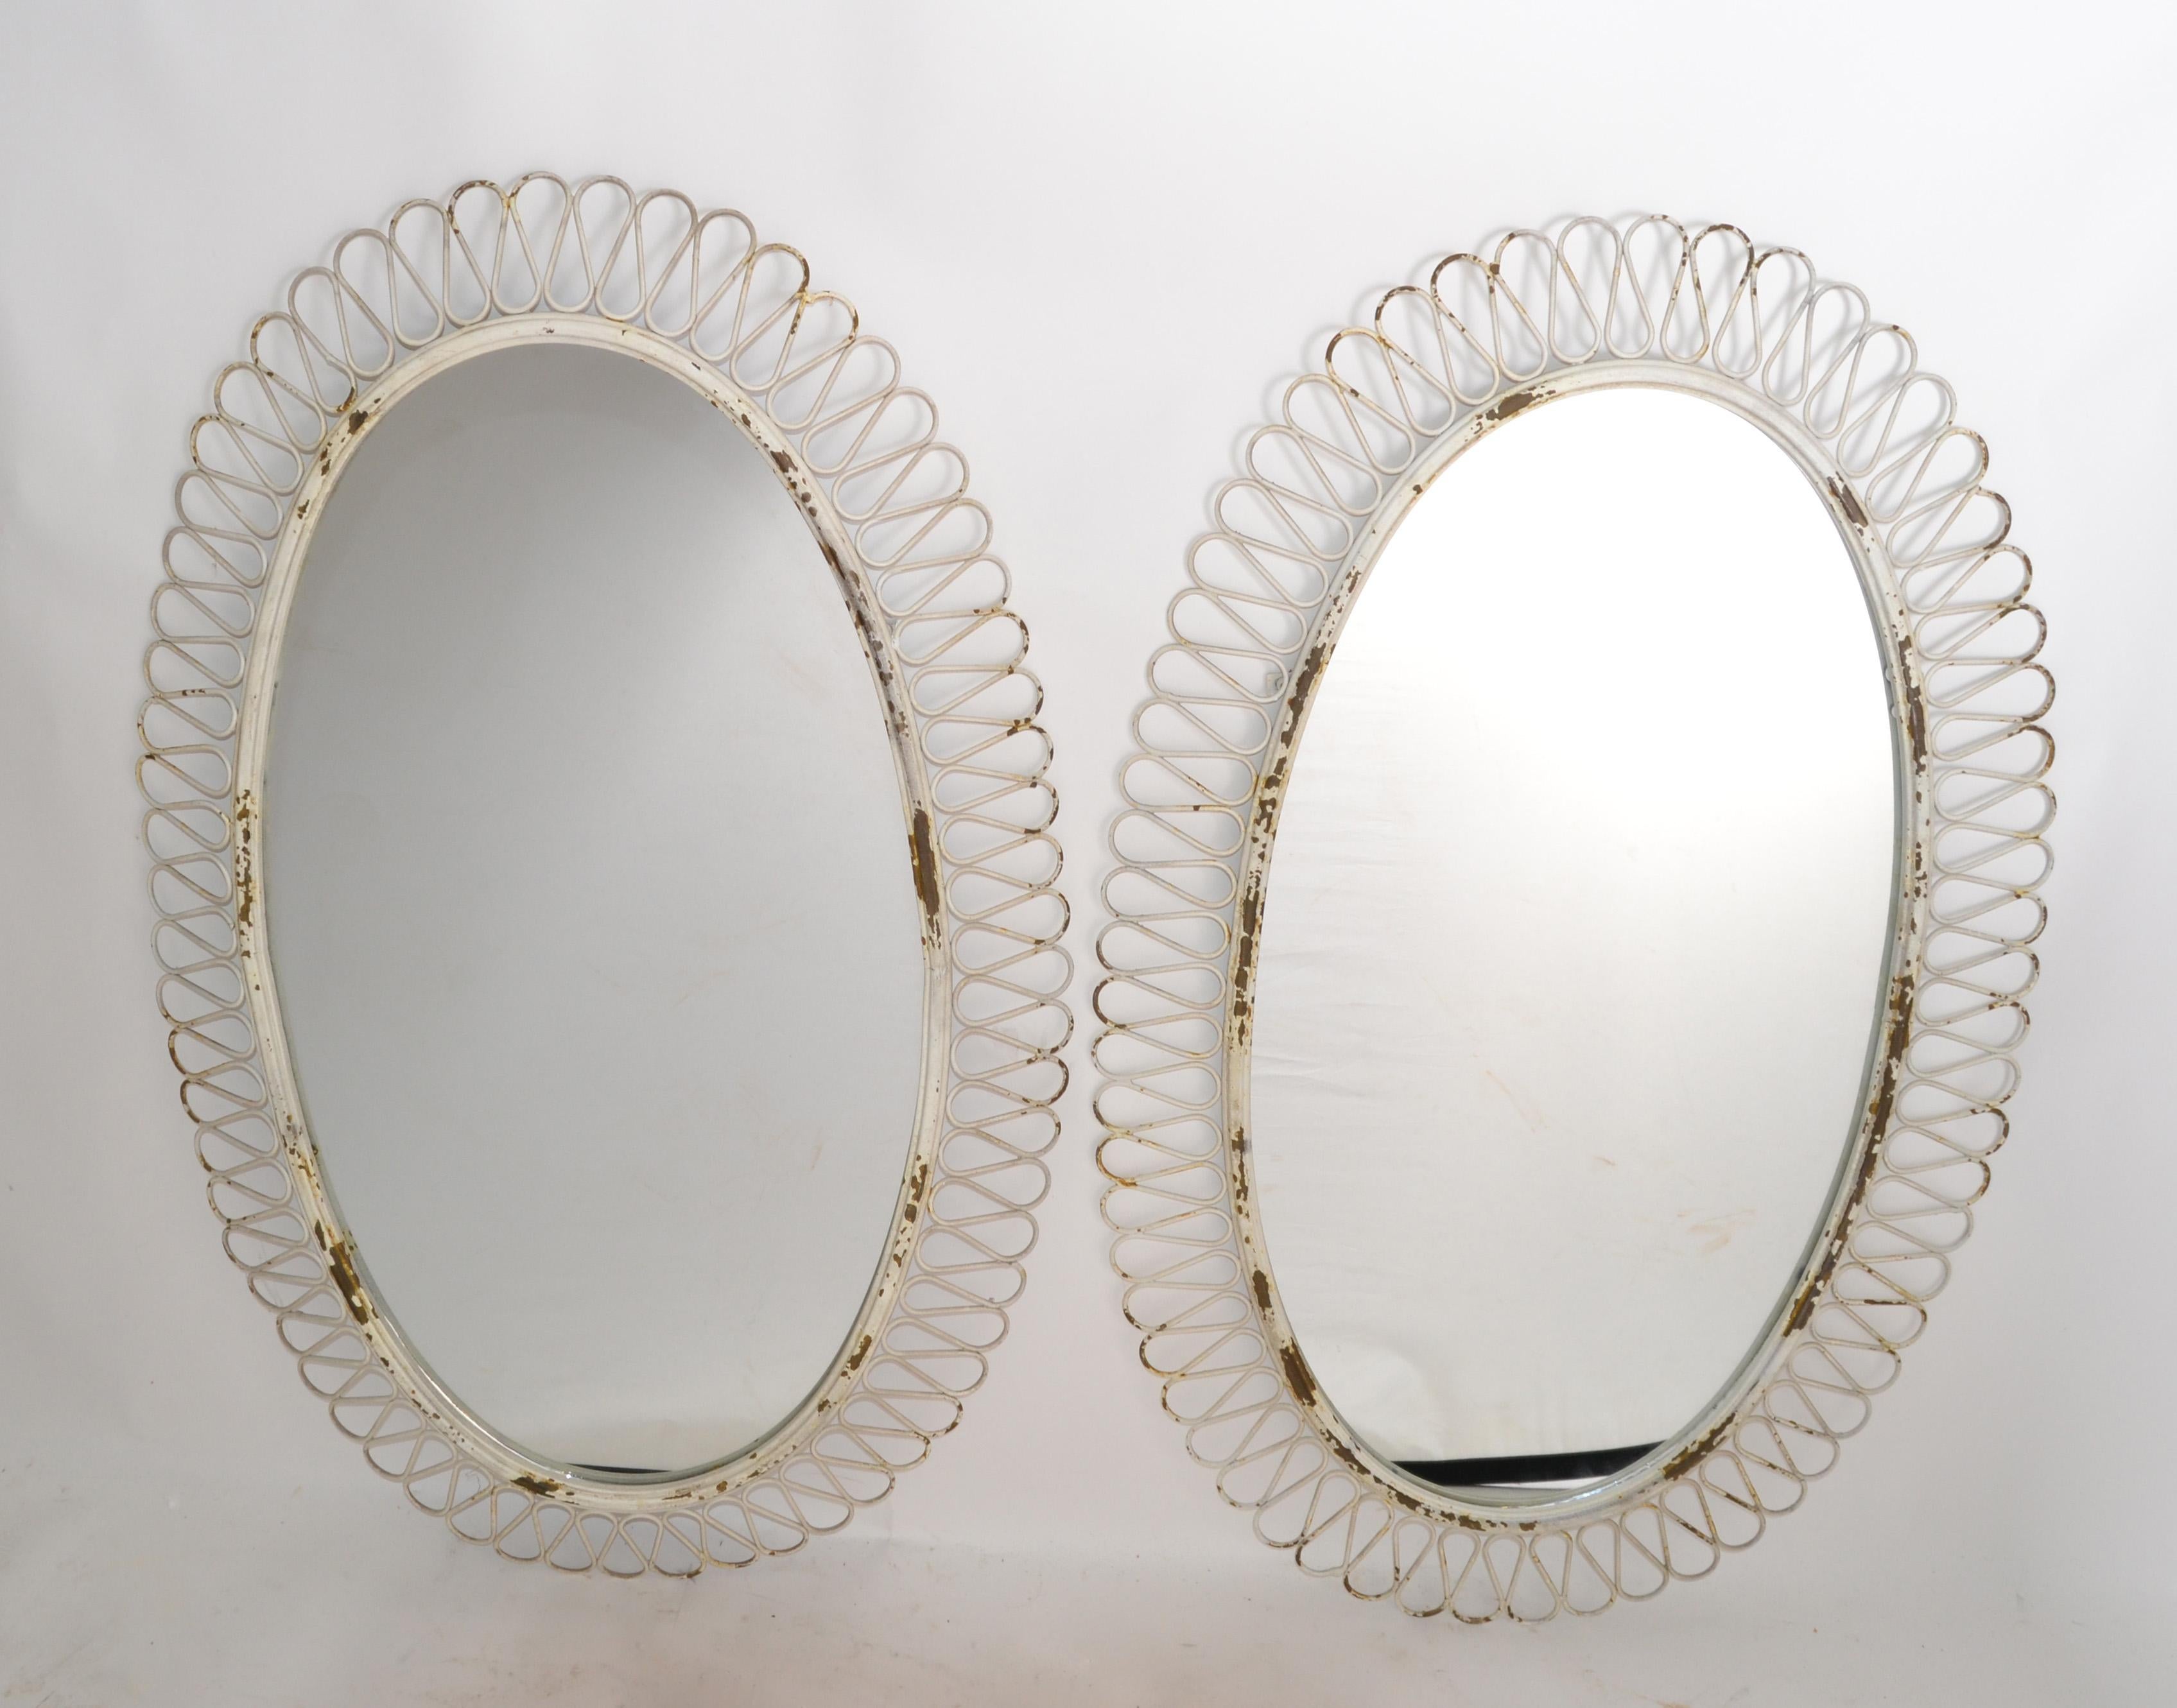 Hand-Crafted Pair of French Oval Wrought Iron Wall Mirror Antique White distressed Look, 1950